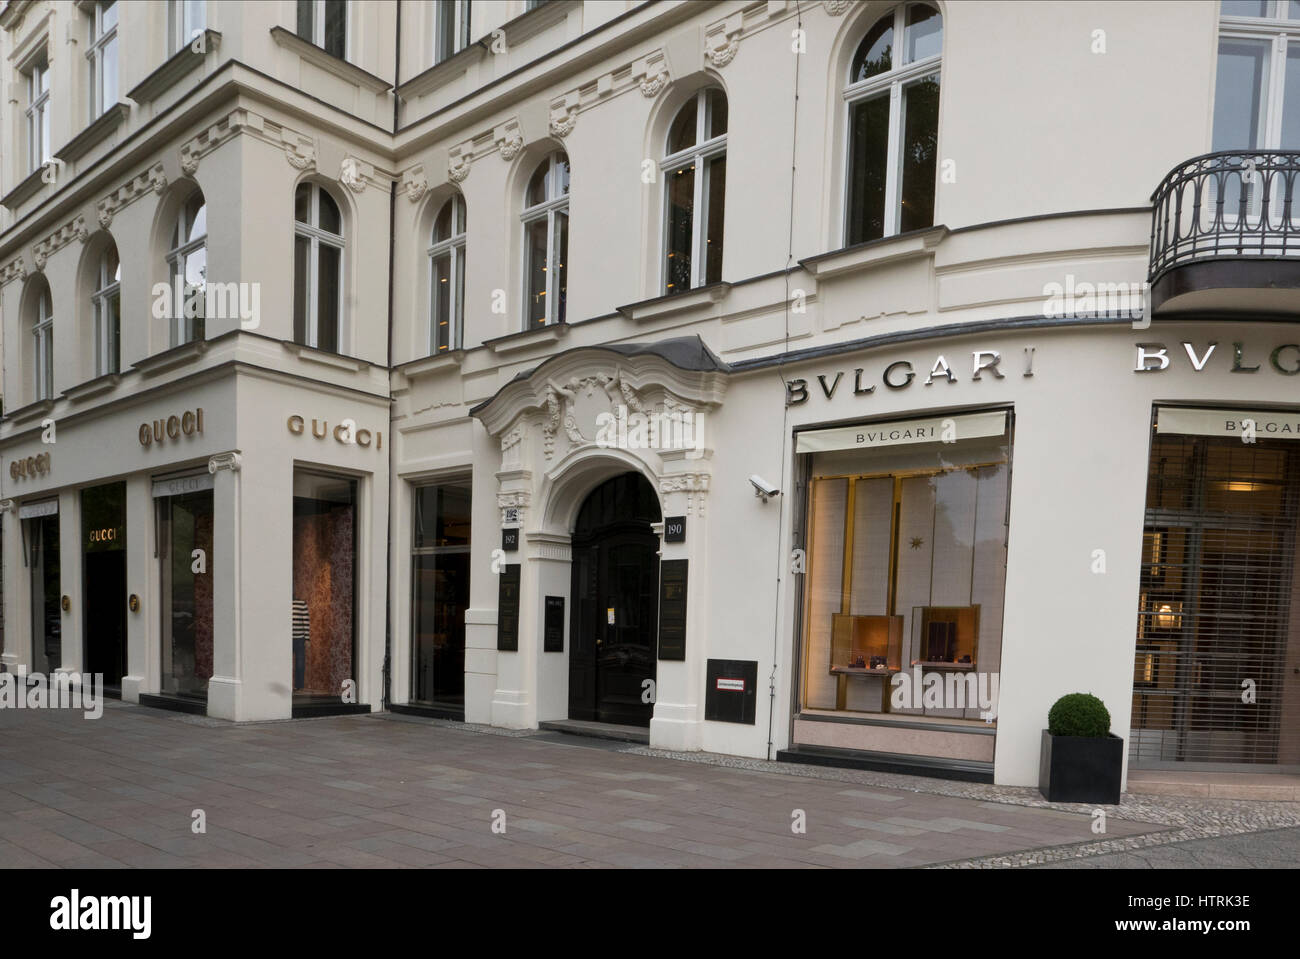 The exterior of a luxurious Gucci shop, Berlin, Stock Photo - Alamy